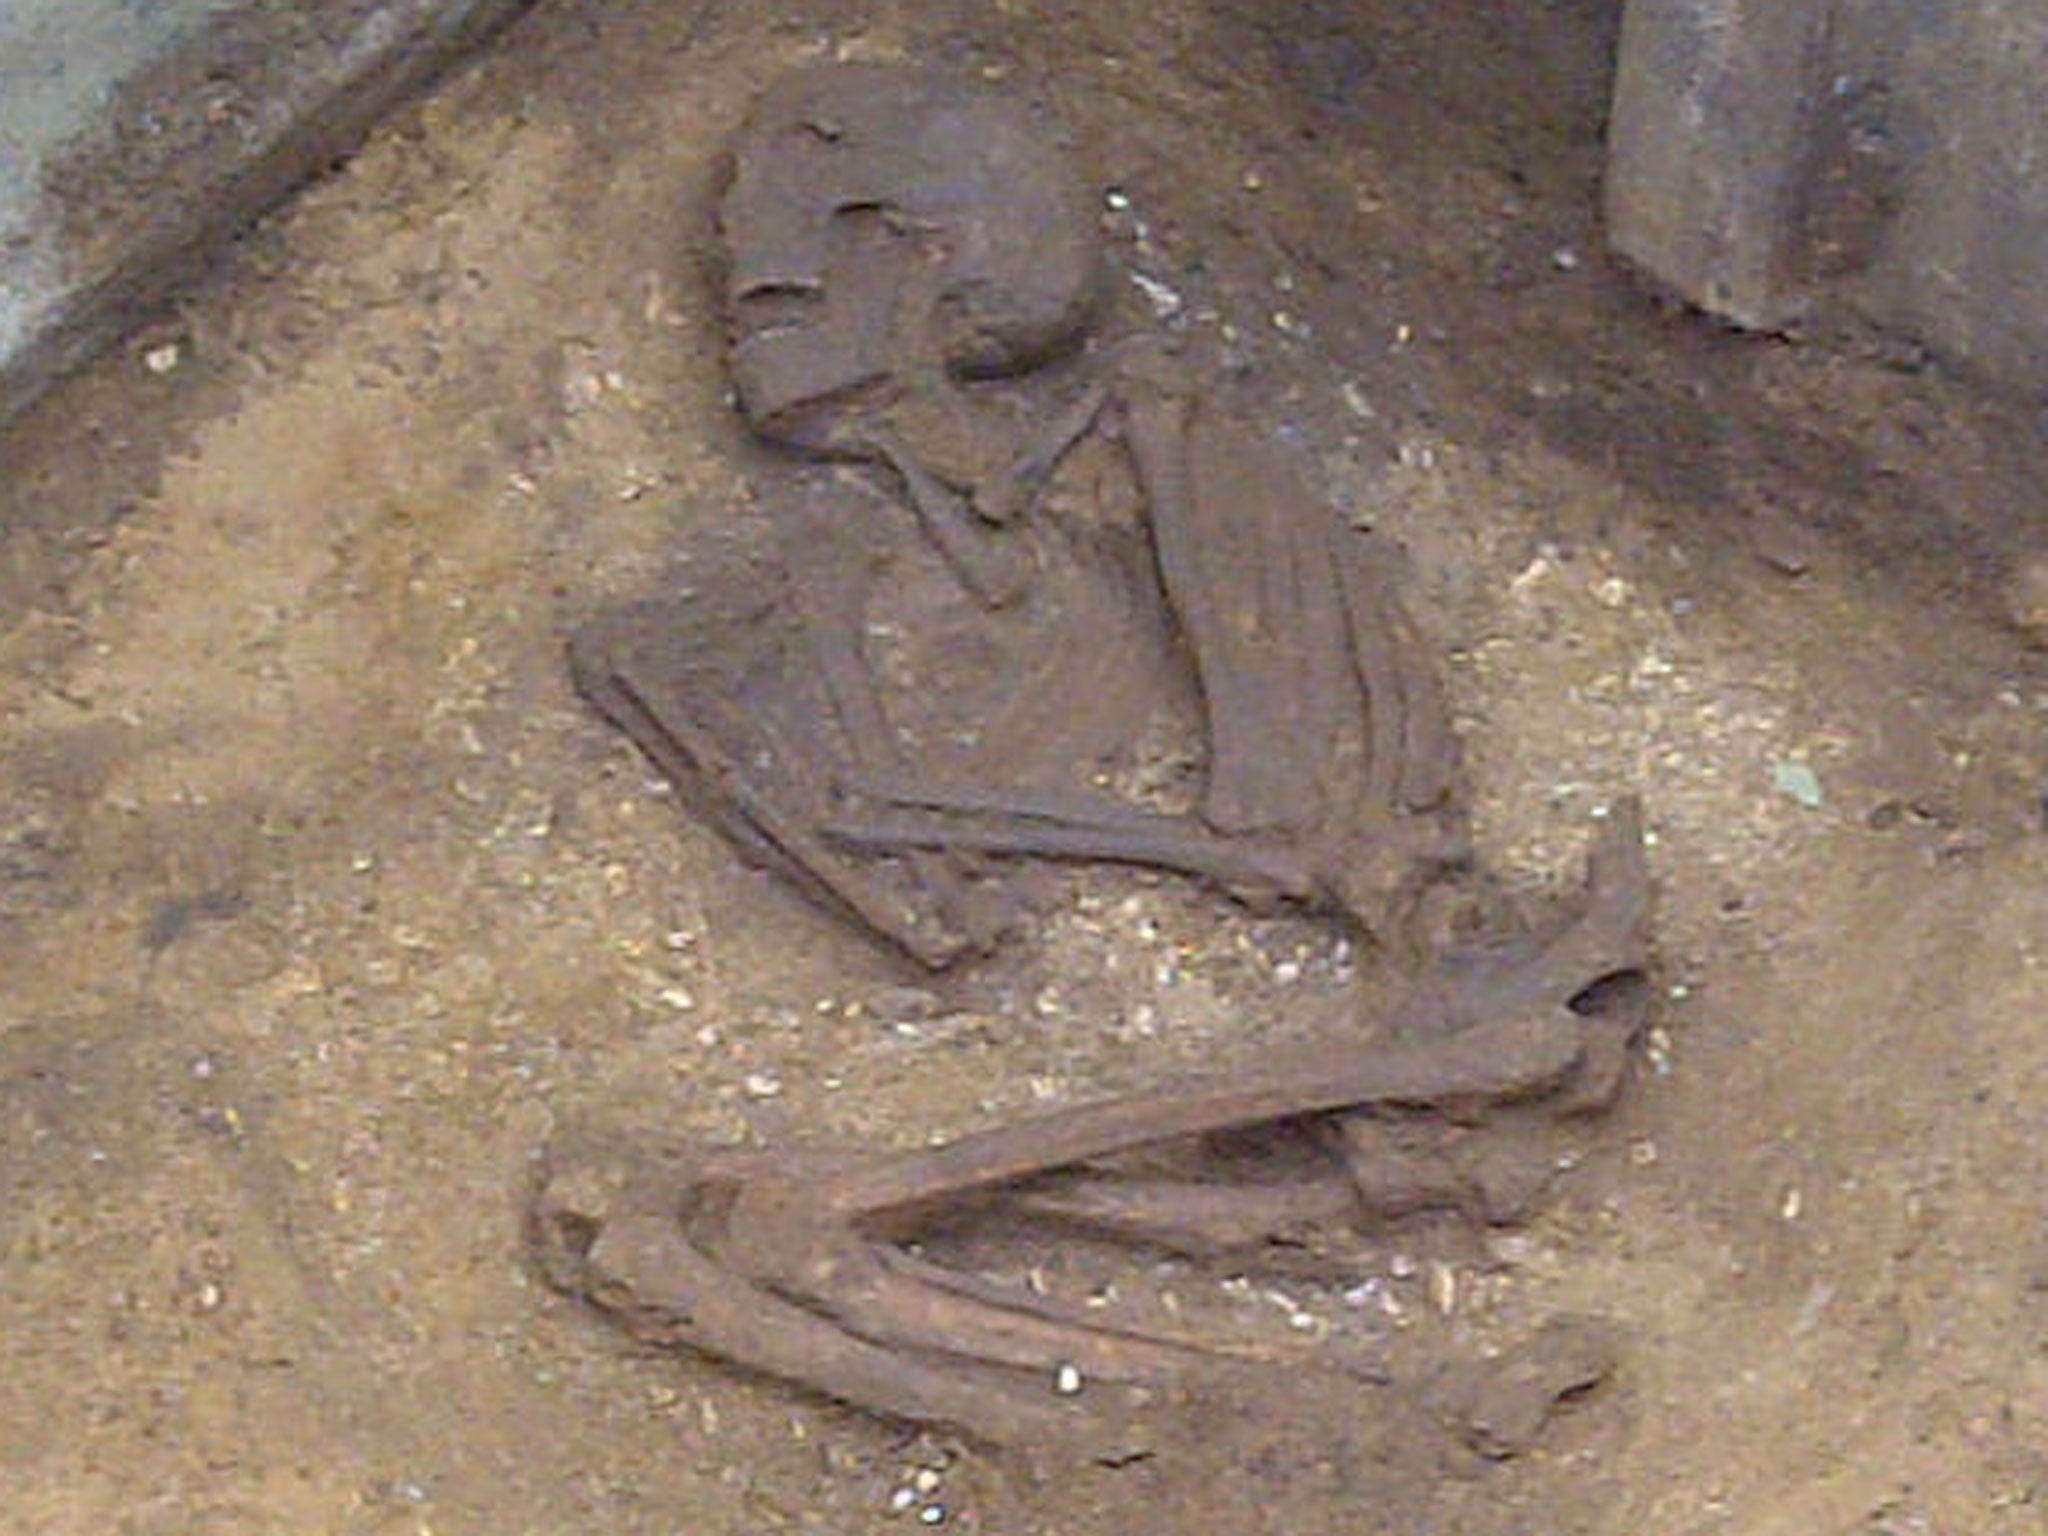 The skeleton was found in a crouched or foetal position, possibly mirroring birth